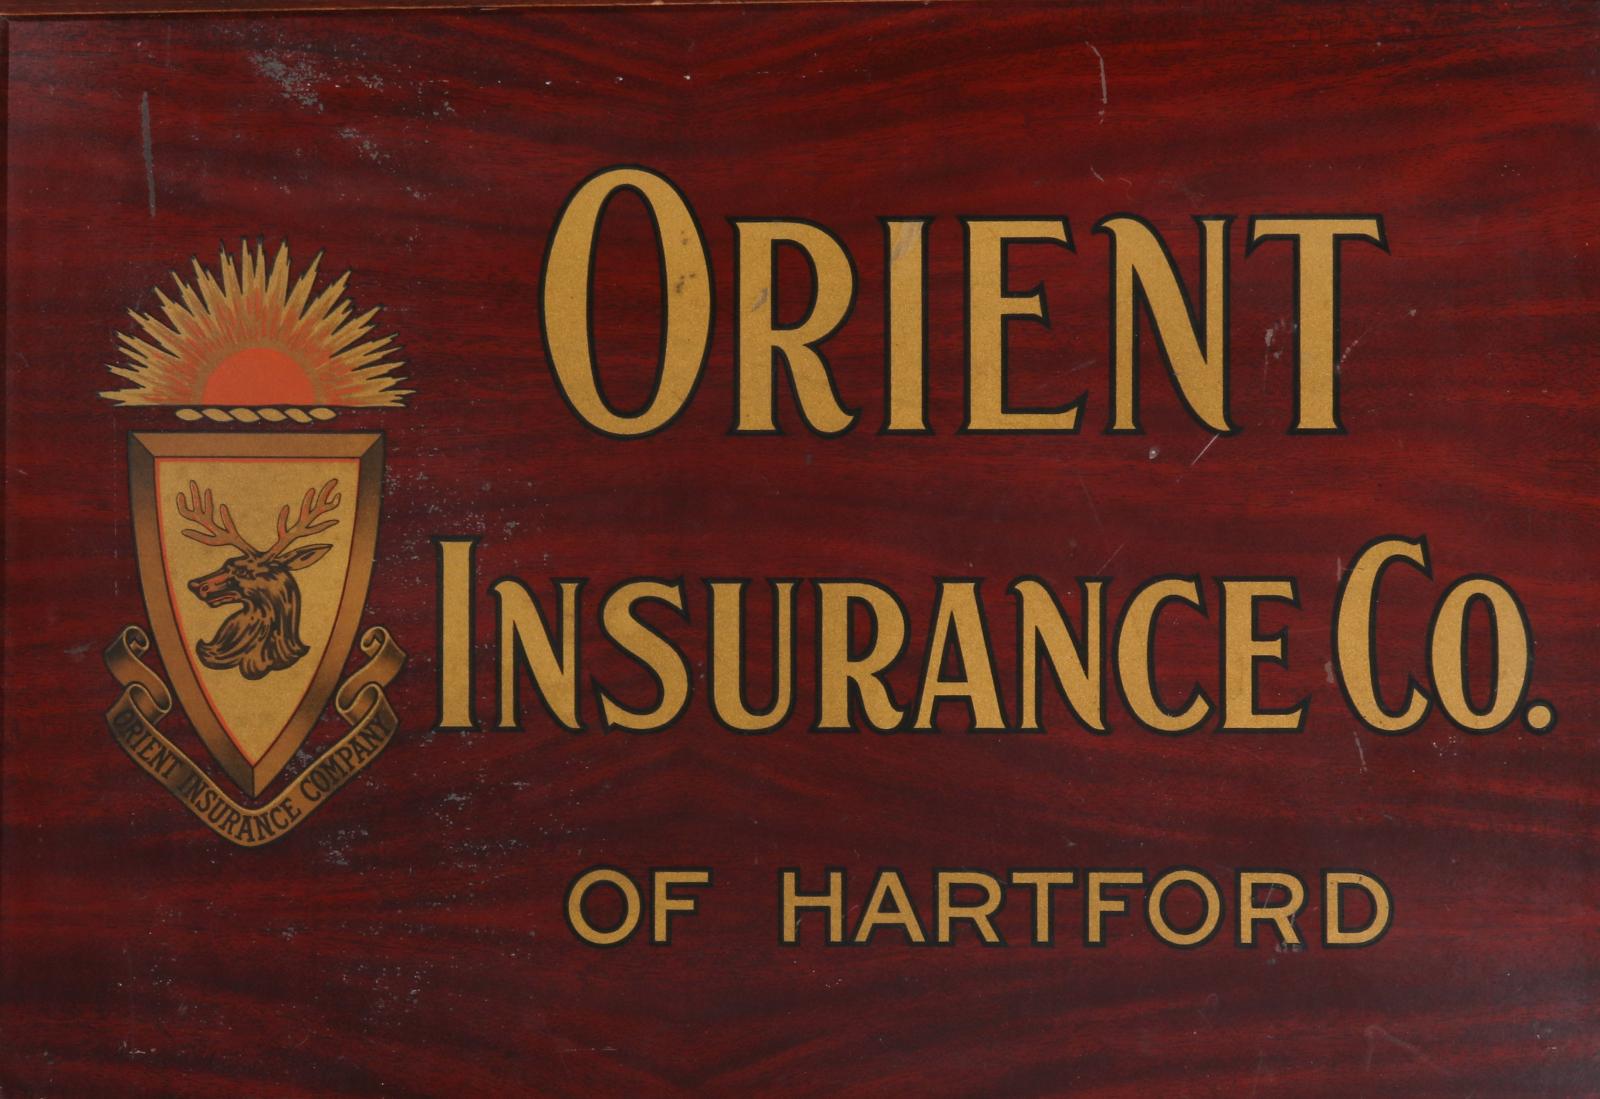 ORIENT INSURANCE CO. TIN ADVERTISING SIGN